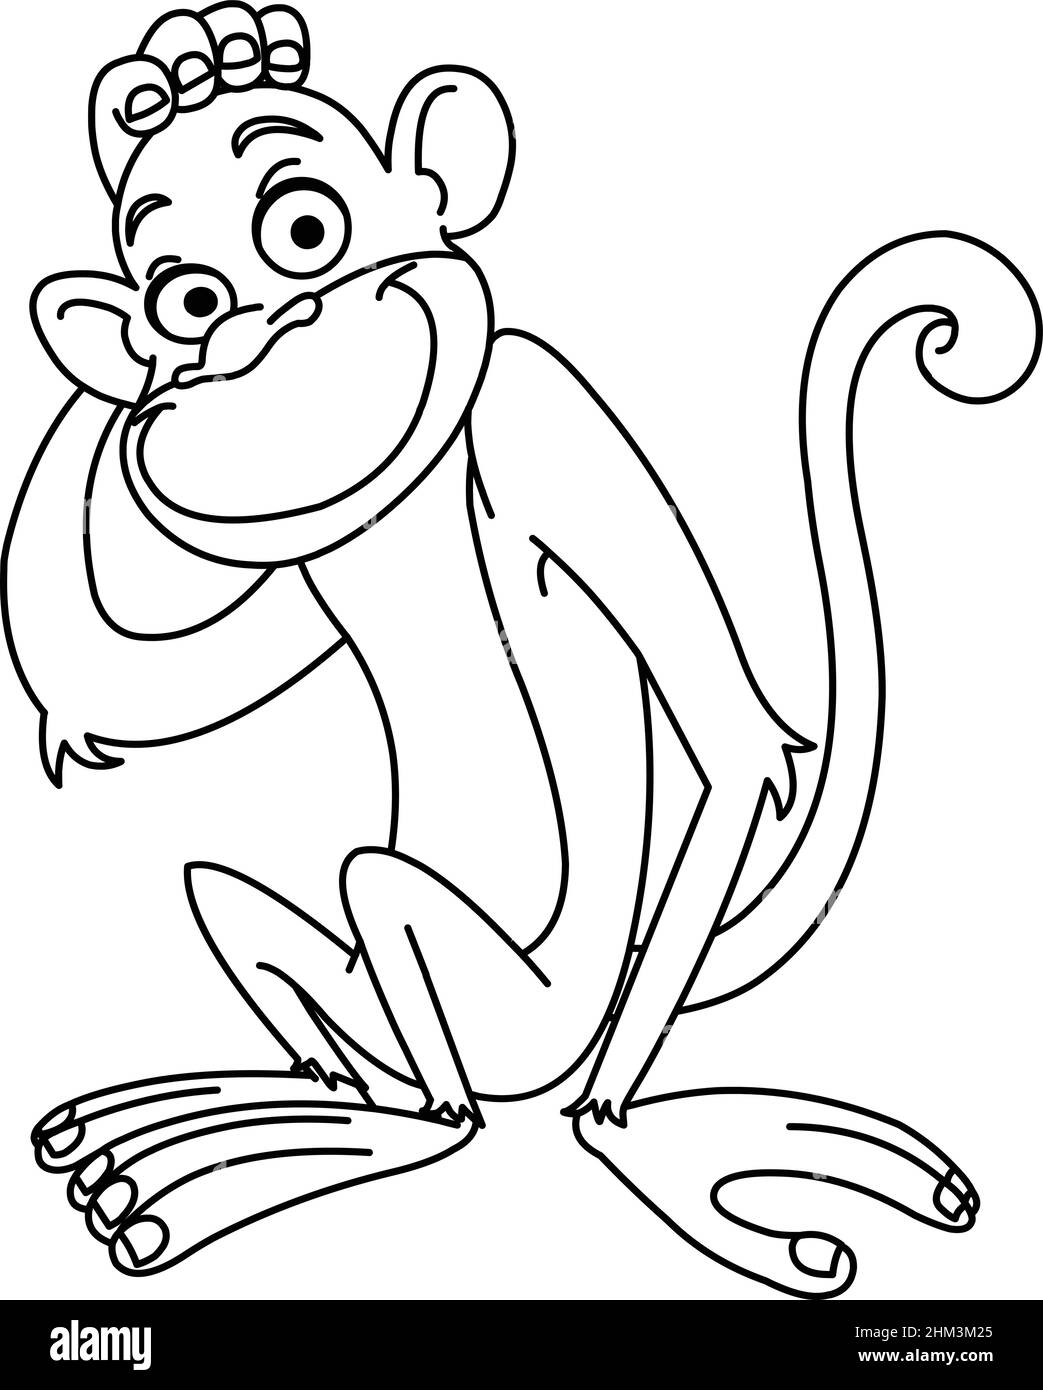 Outlined monkey scratching his head thinking. Vector line art illustration coloring page. Stock Vector